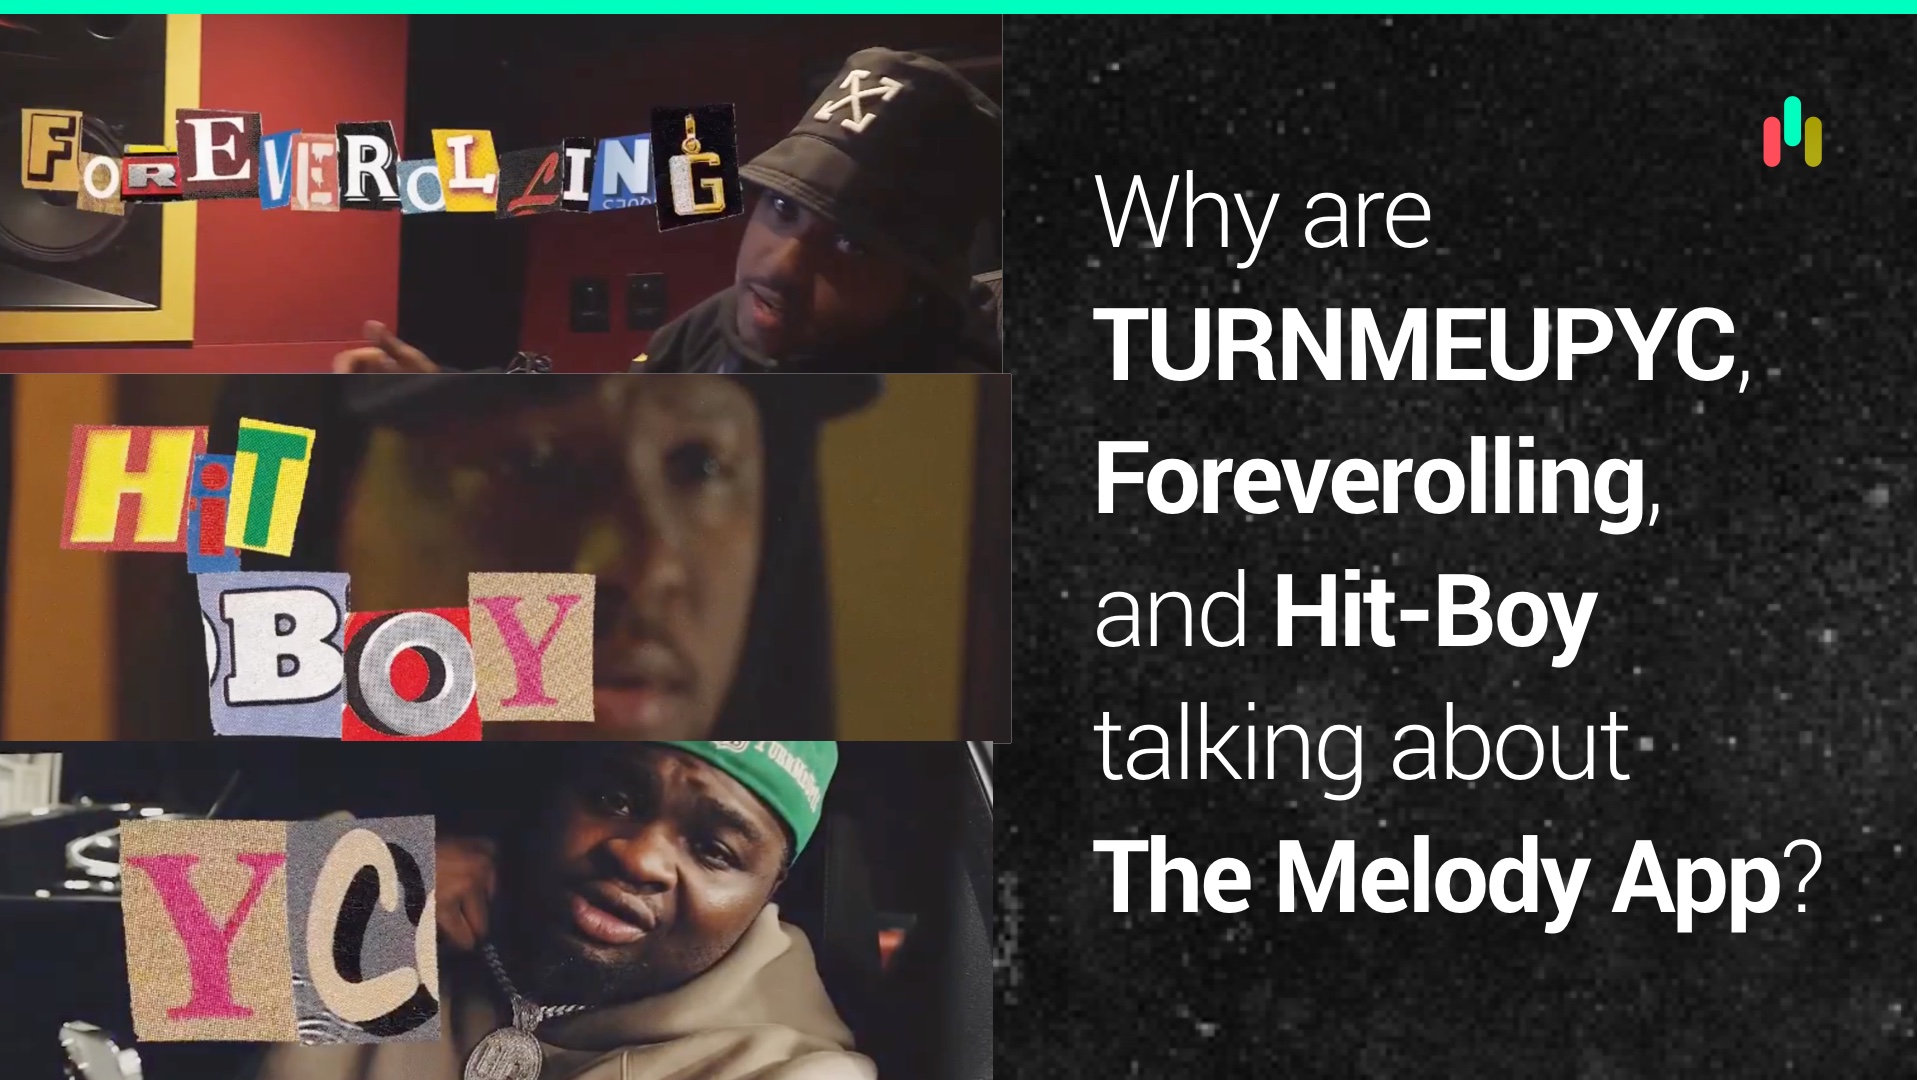 Find out why some of music’s biggest producers…TURNMEUPYC, Foreverolling, and Hit-Boy are talking about The Melody App